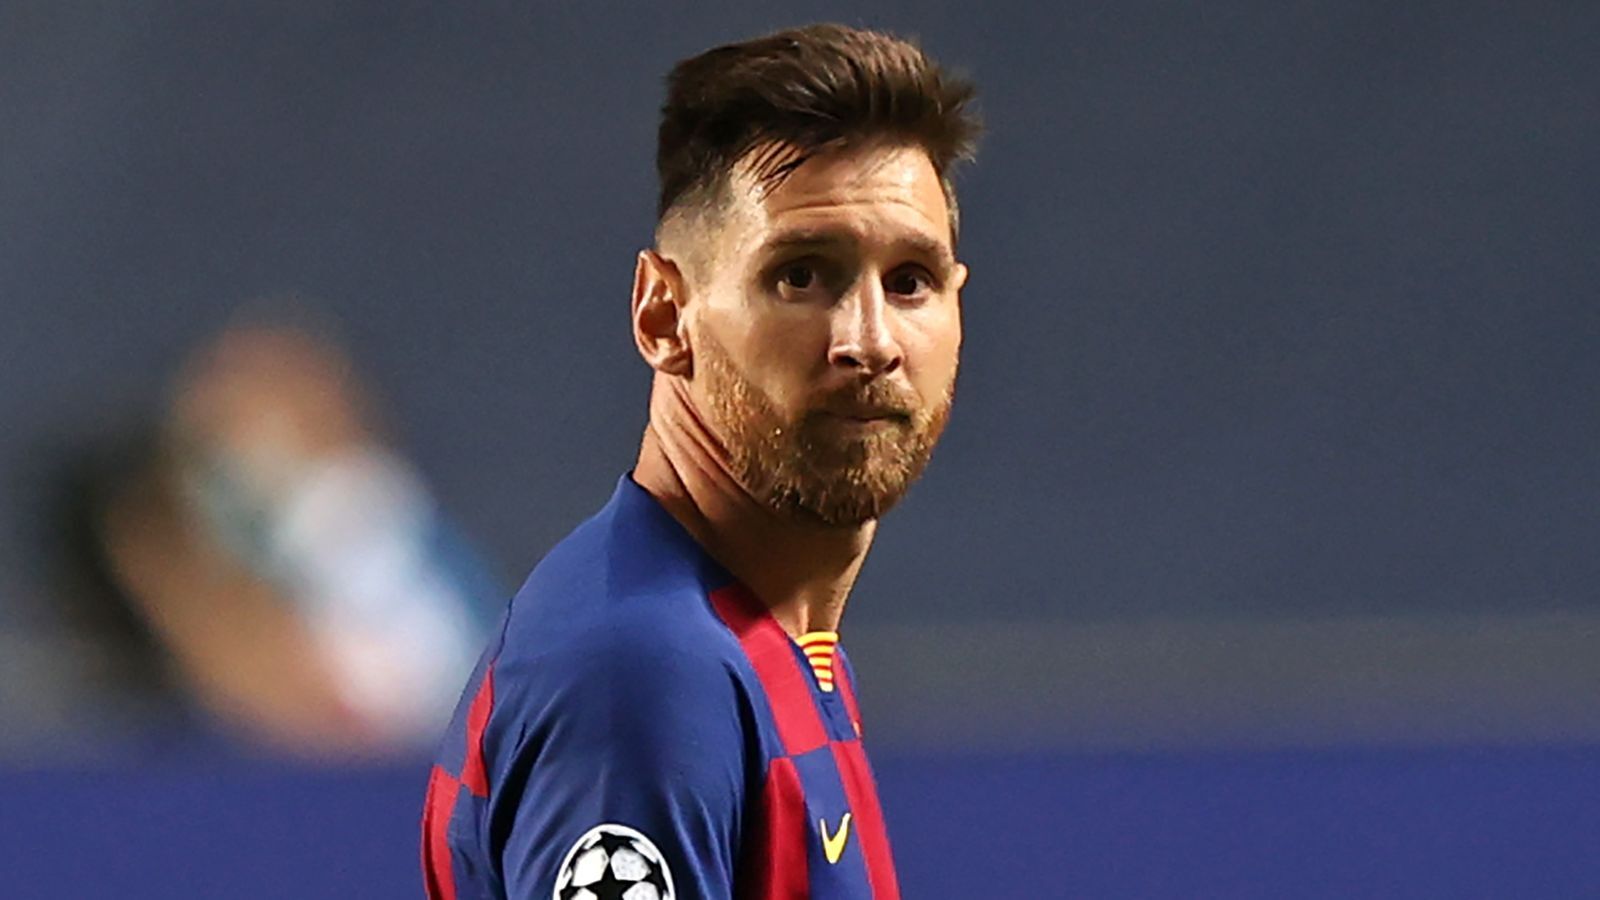 Lionel Messi should have pursued professional advice, says teammate Hernán Crespo  